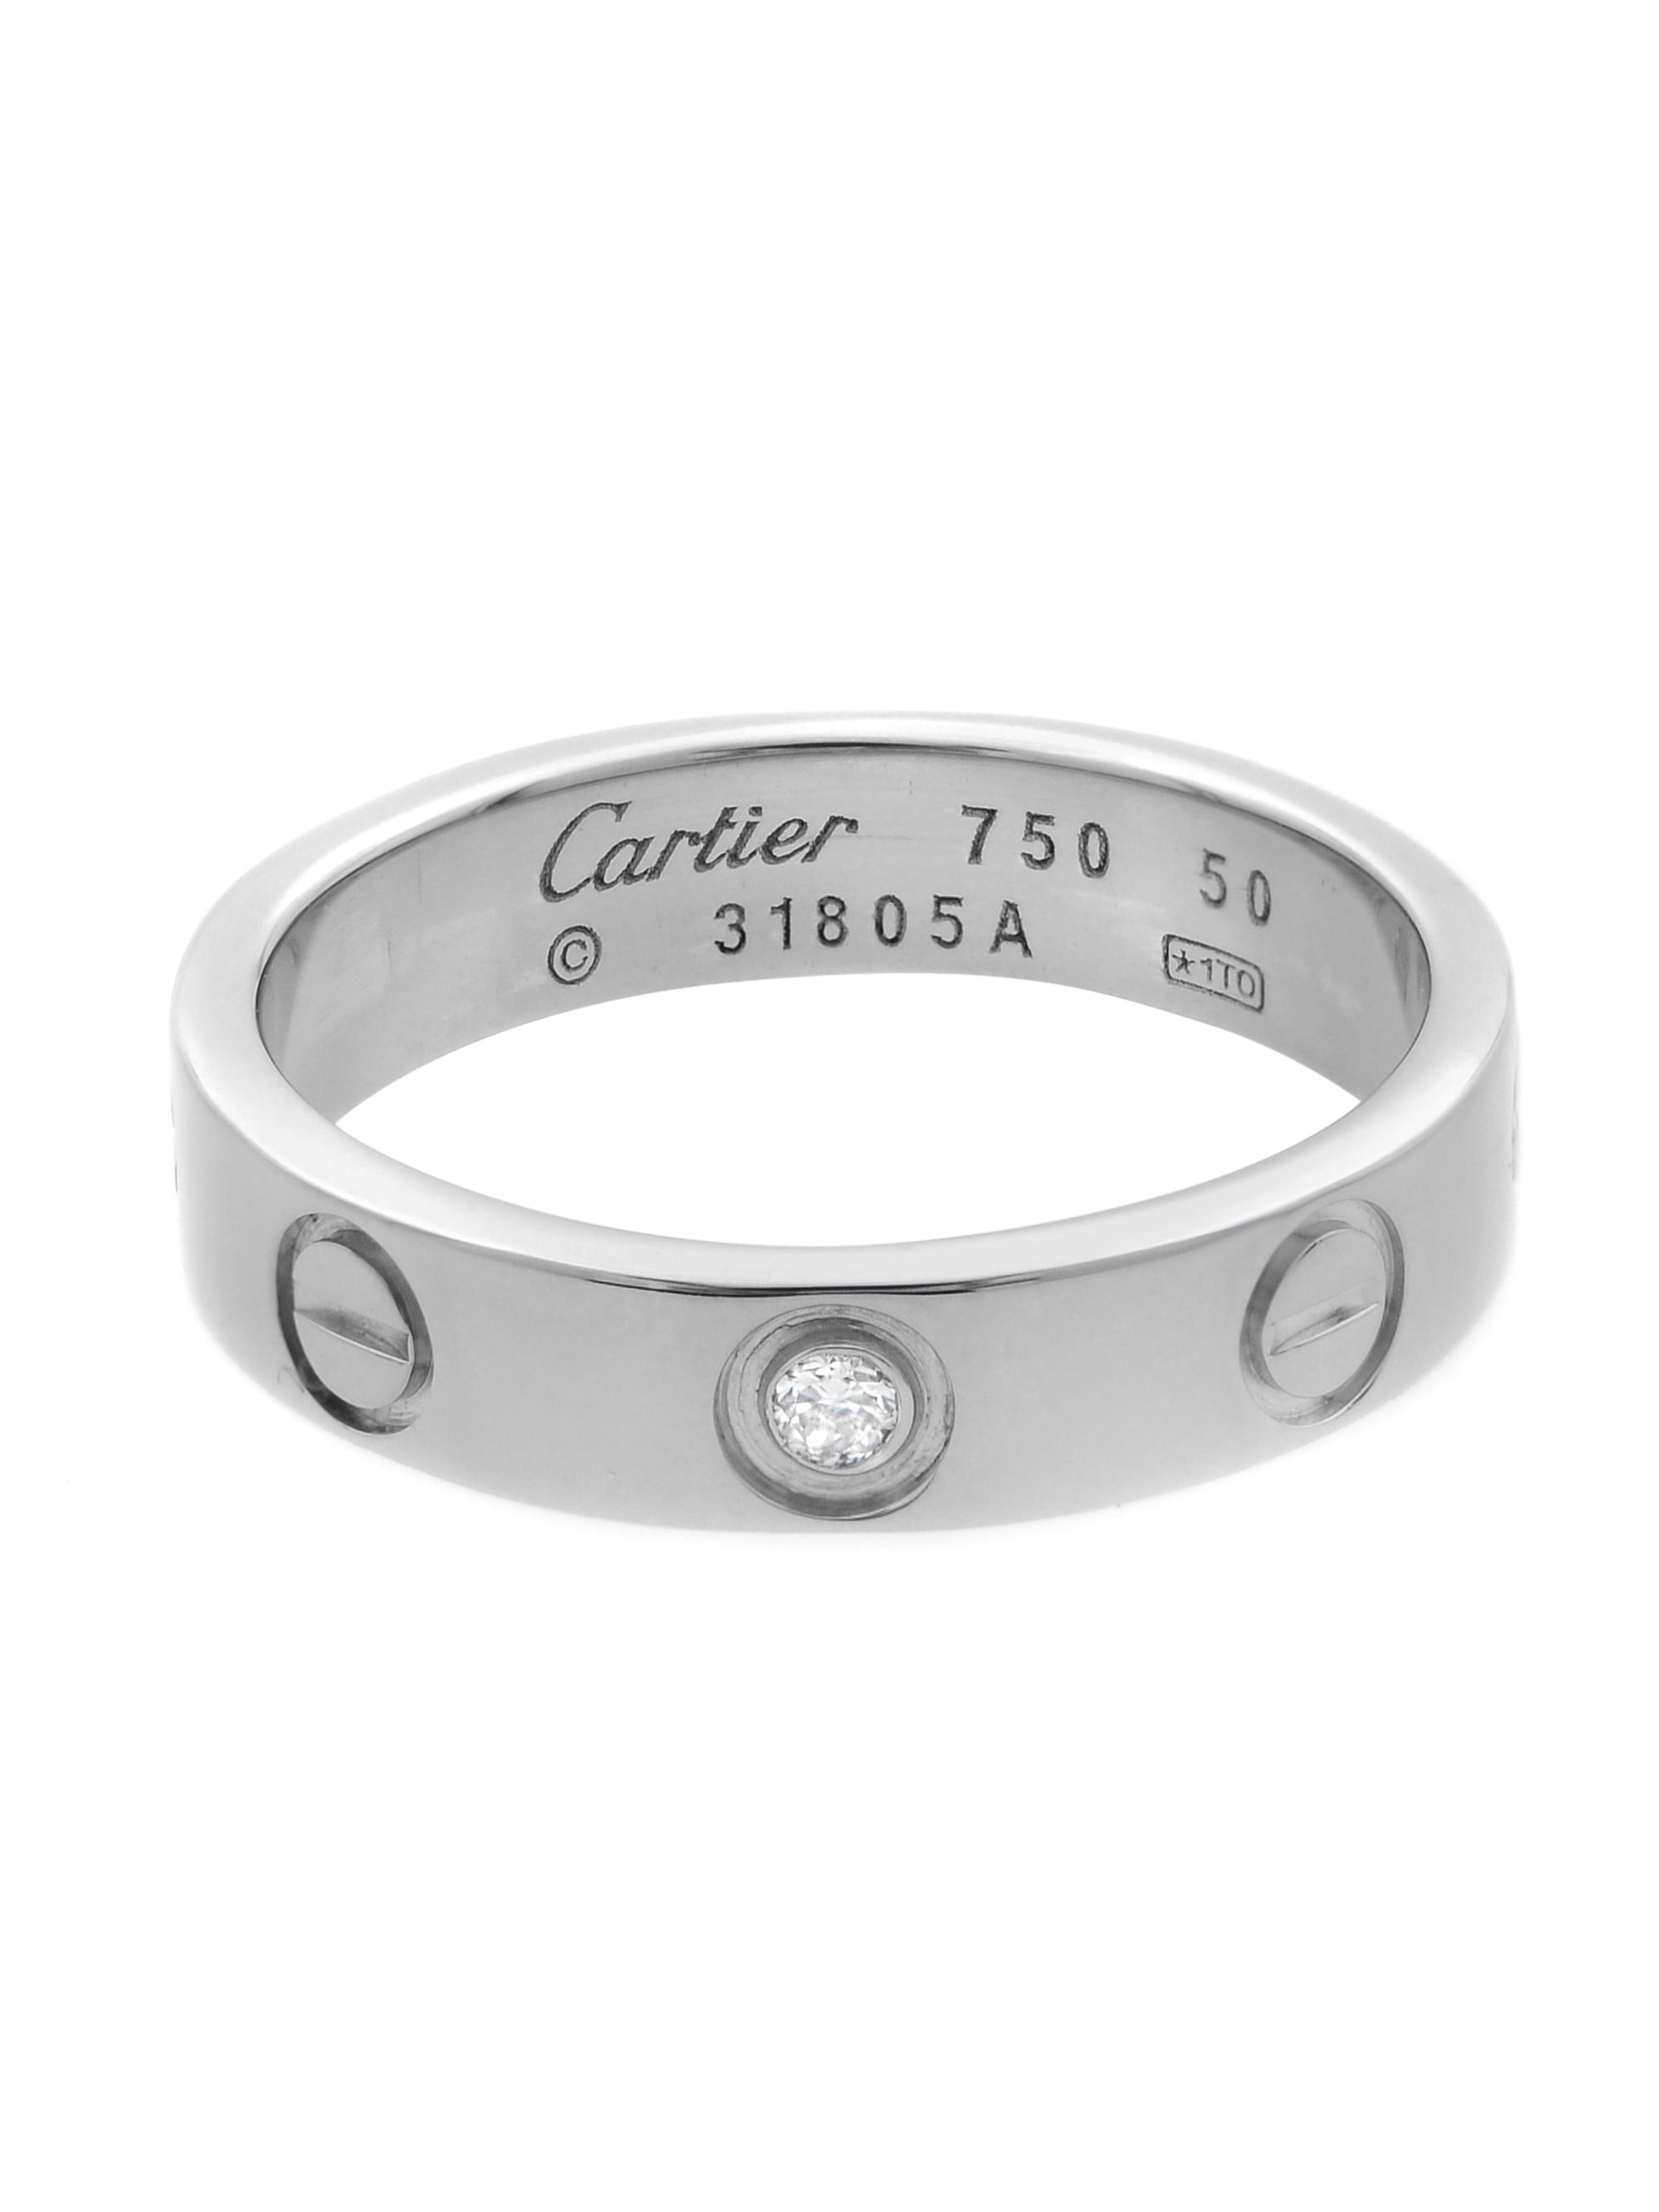 cartier ring in usa